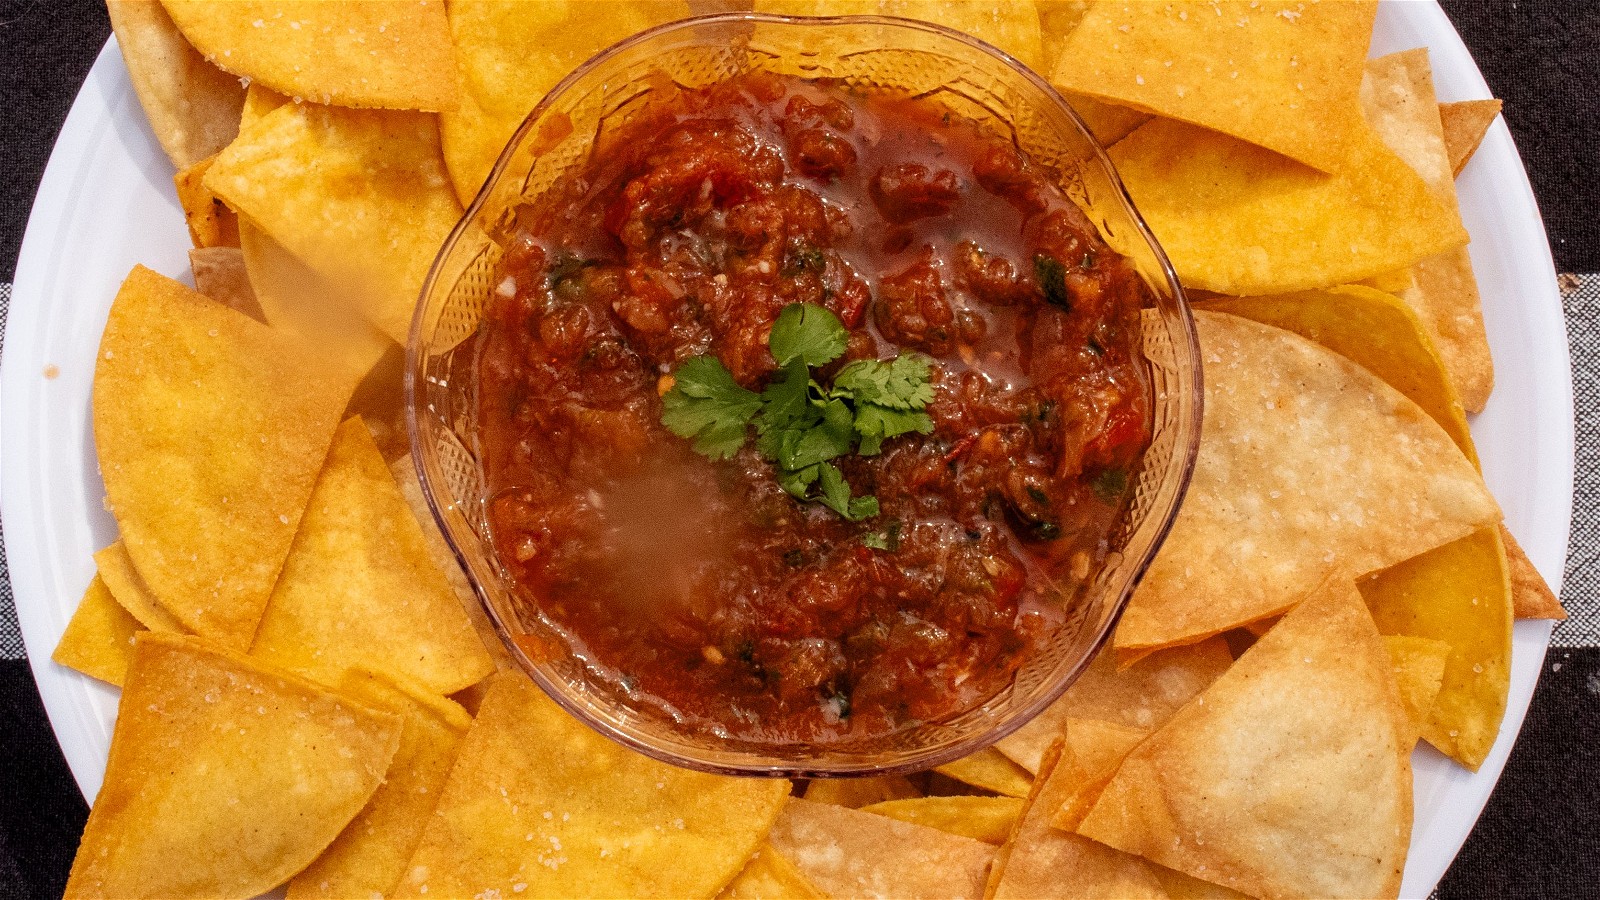 Image of Homemade Tortilla Chips and Roasted Salsa